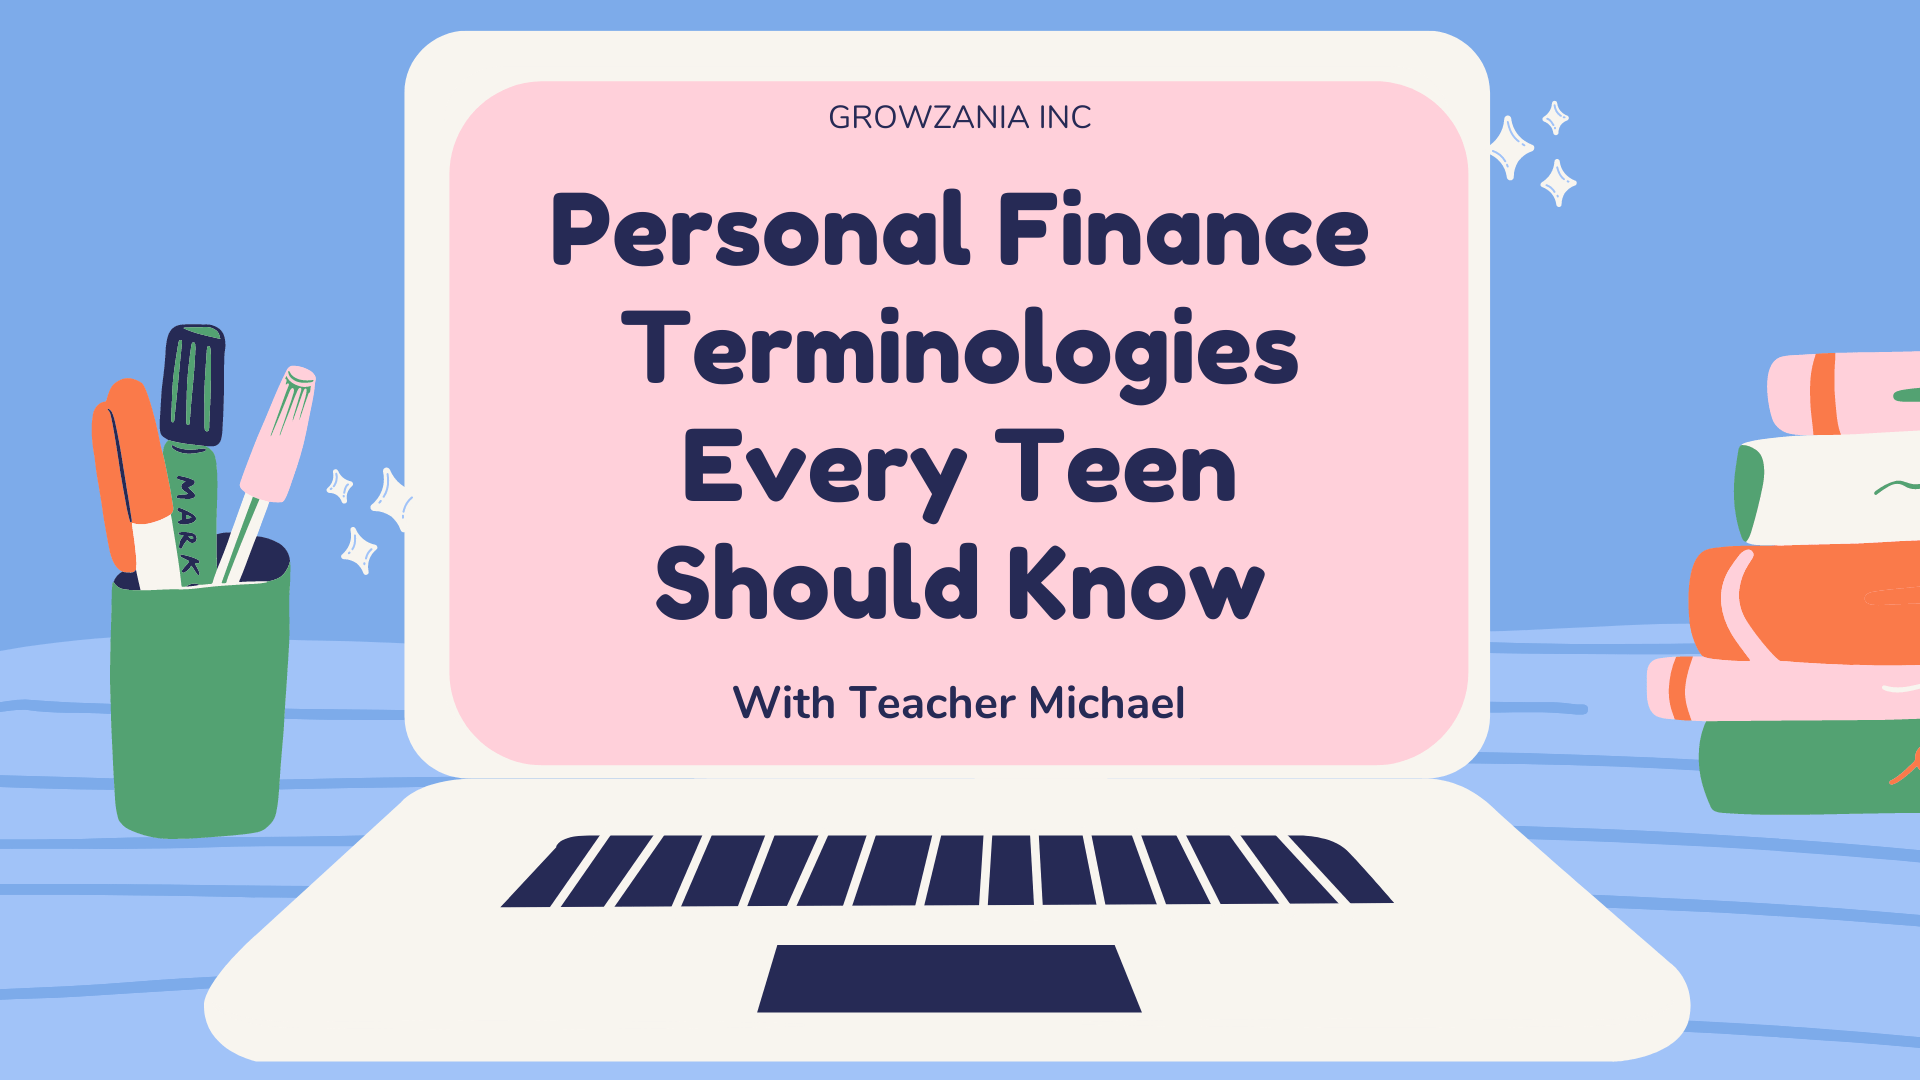 Personal finance terminology every teenager should know